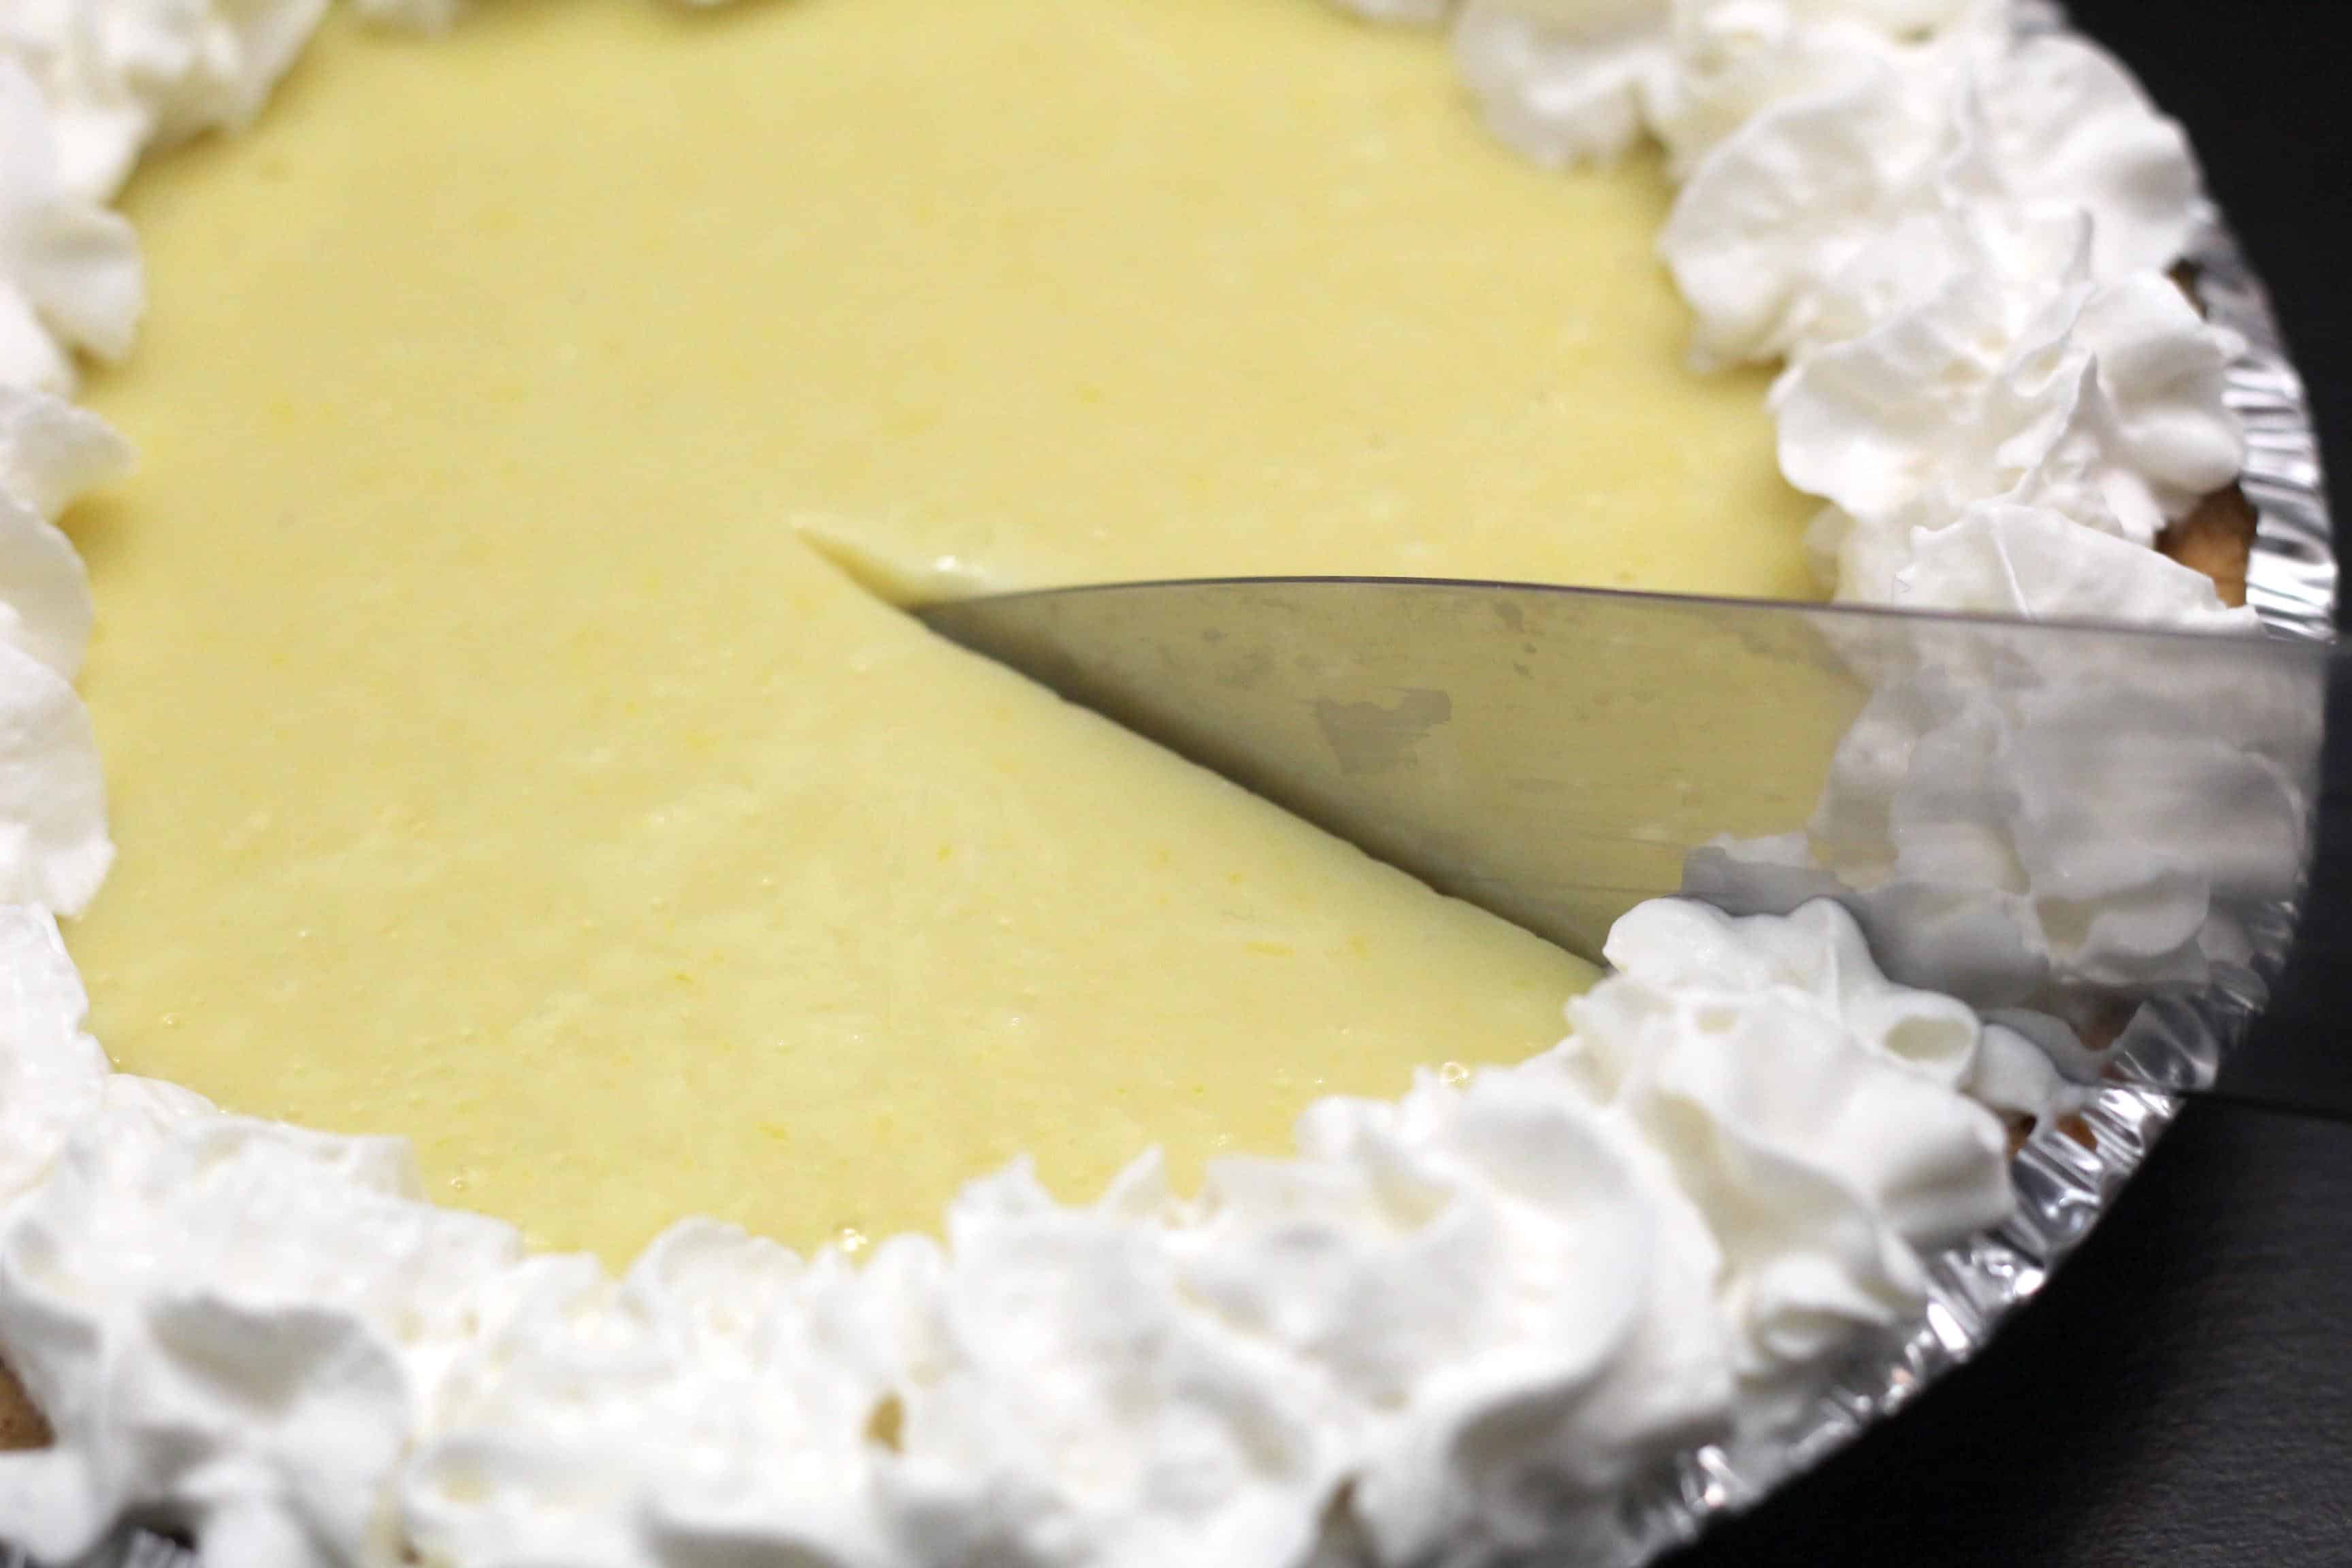 Authentic key lime pie recipe! This easy key lime pie recipe is sure to be the perfect easy dessert for your next dessert party or family get together. Bring a taste of Florida to the table with this delicious dessert! 